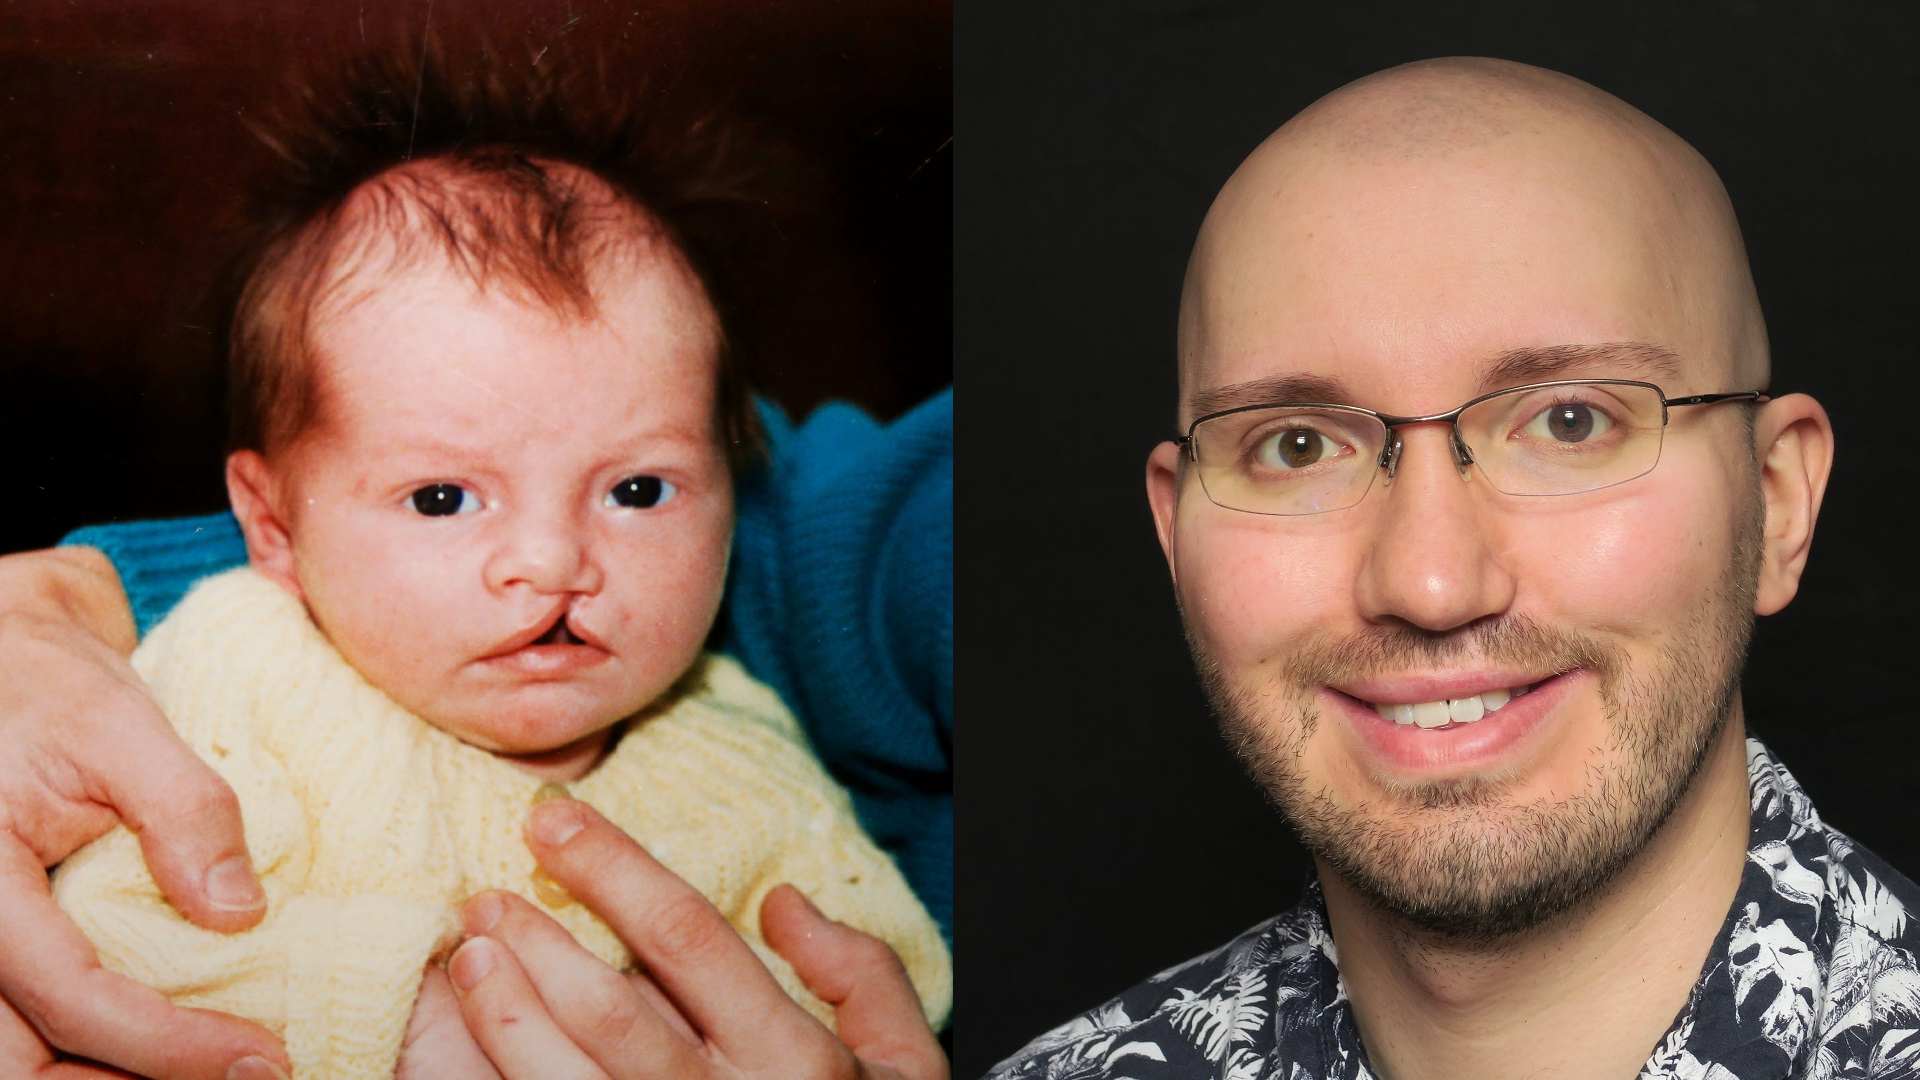 Left: a baby with a cleft lip being held in someone's arms. Right: a man with glasses, wearing a black and white shirt smiling towards the camera